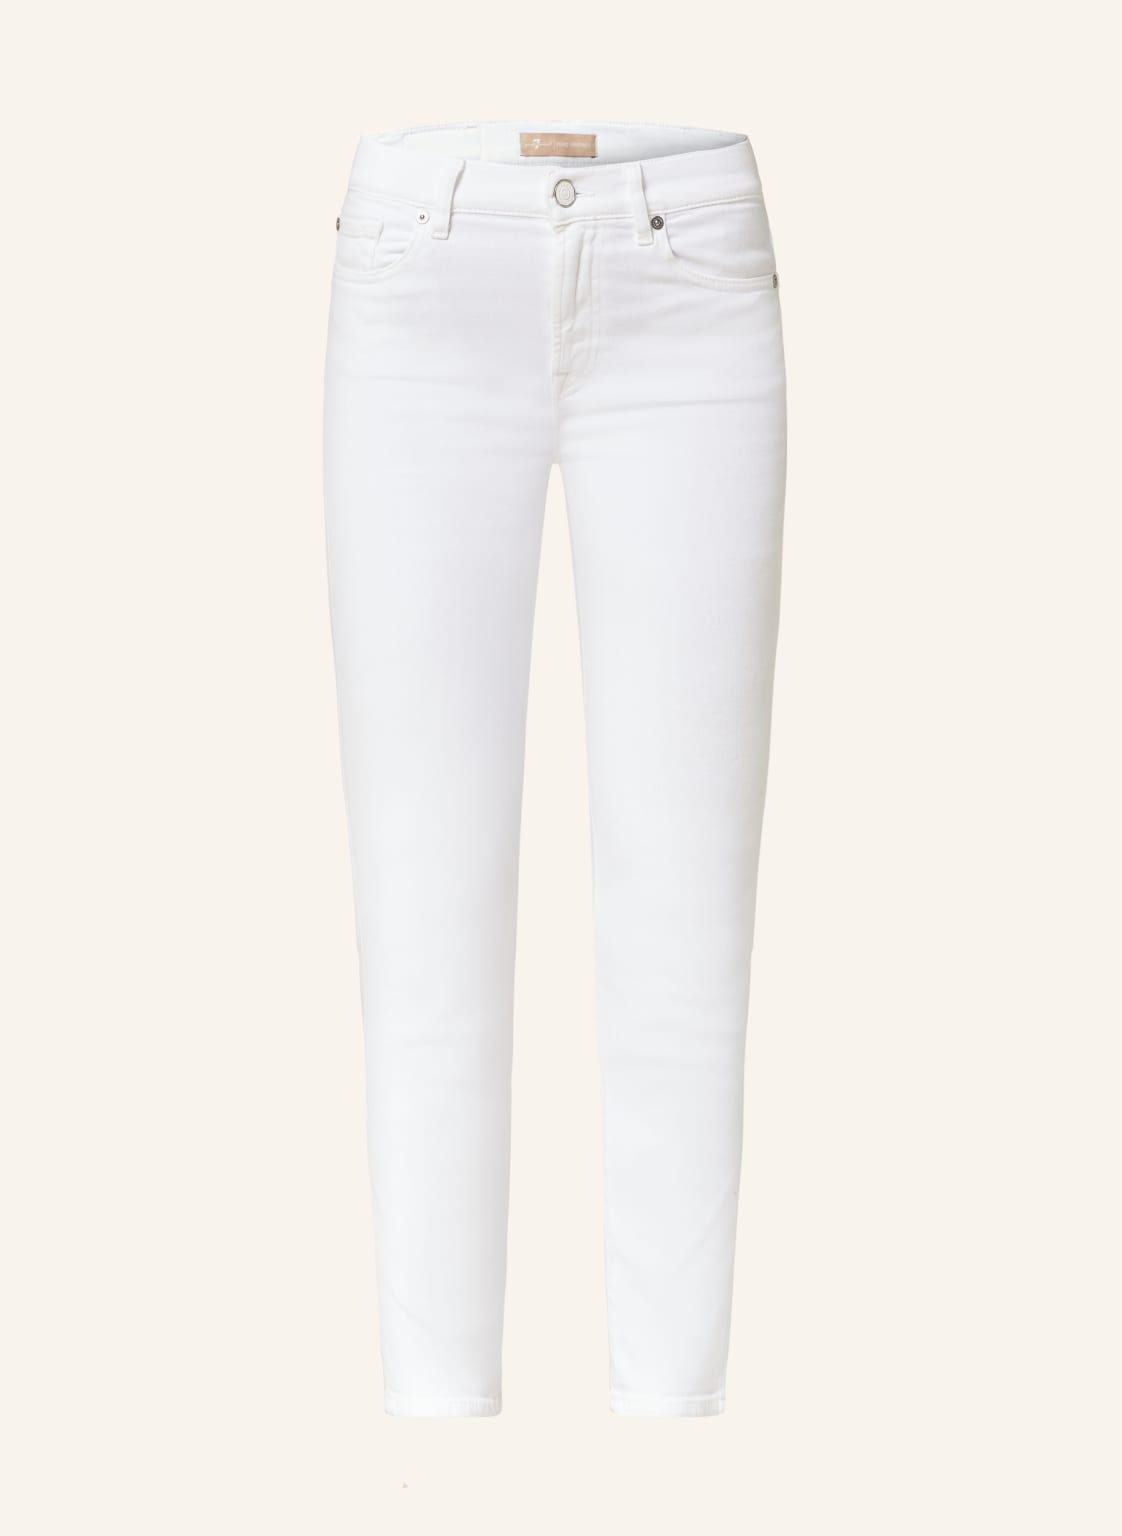 7 For All Mankind Skinny Jeans Roxanne weiss von 7 For All Mankind